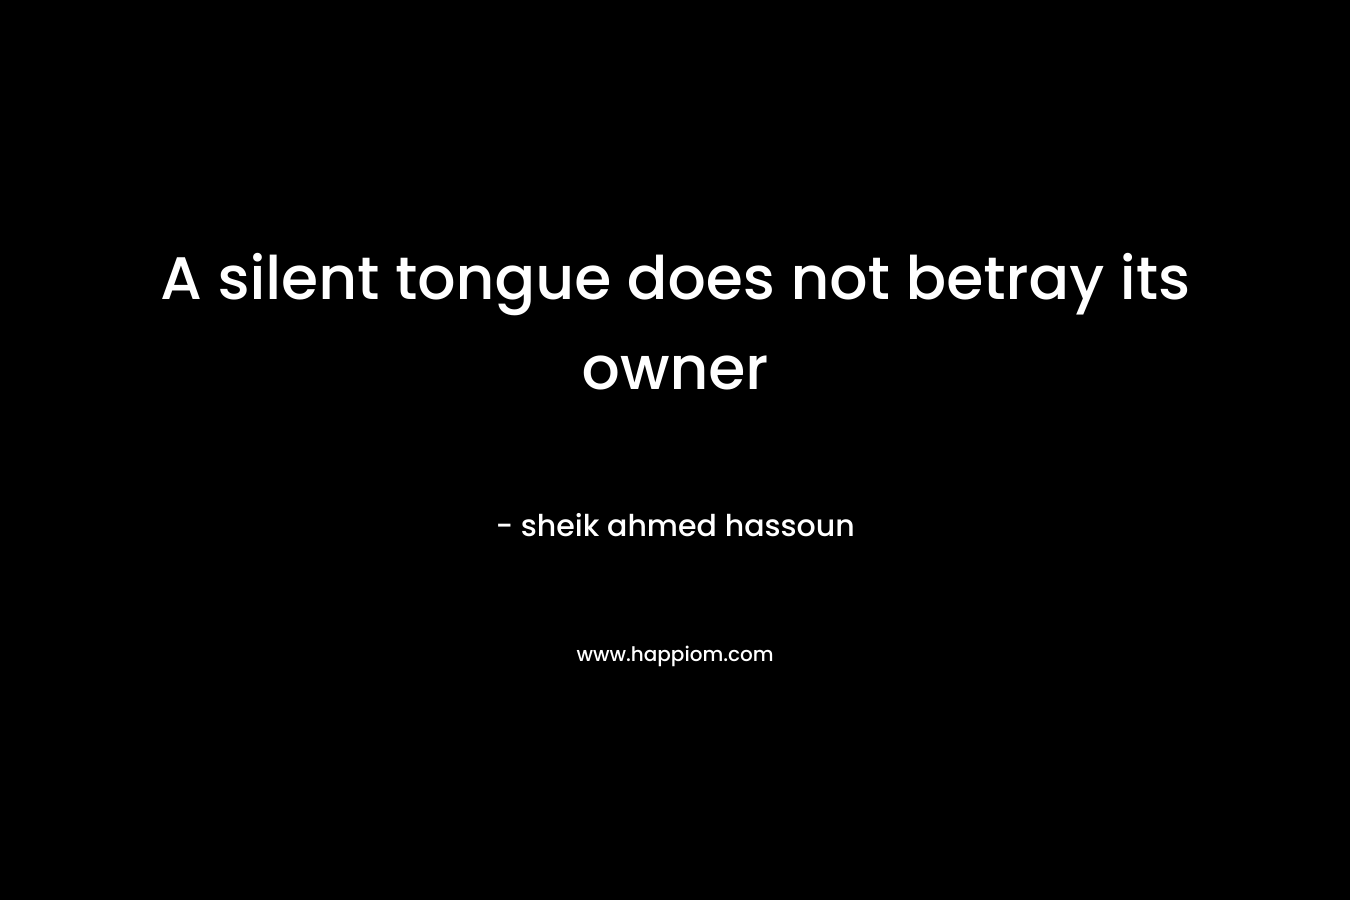 A silent tongue does not betray its owner